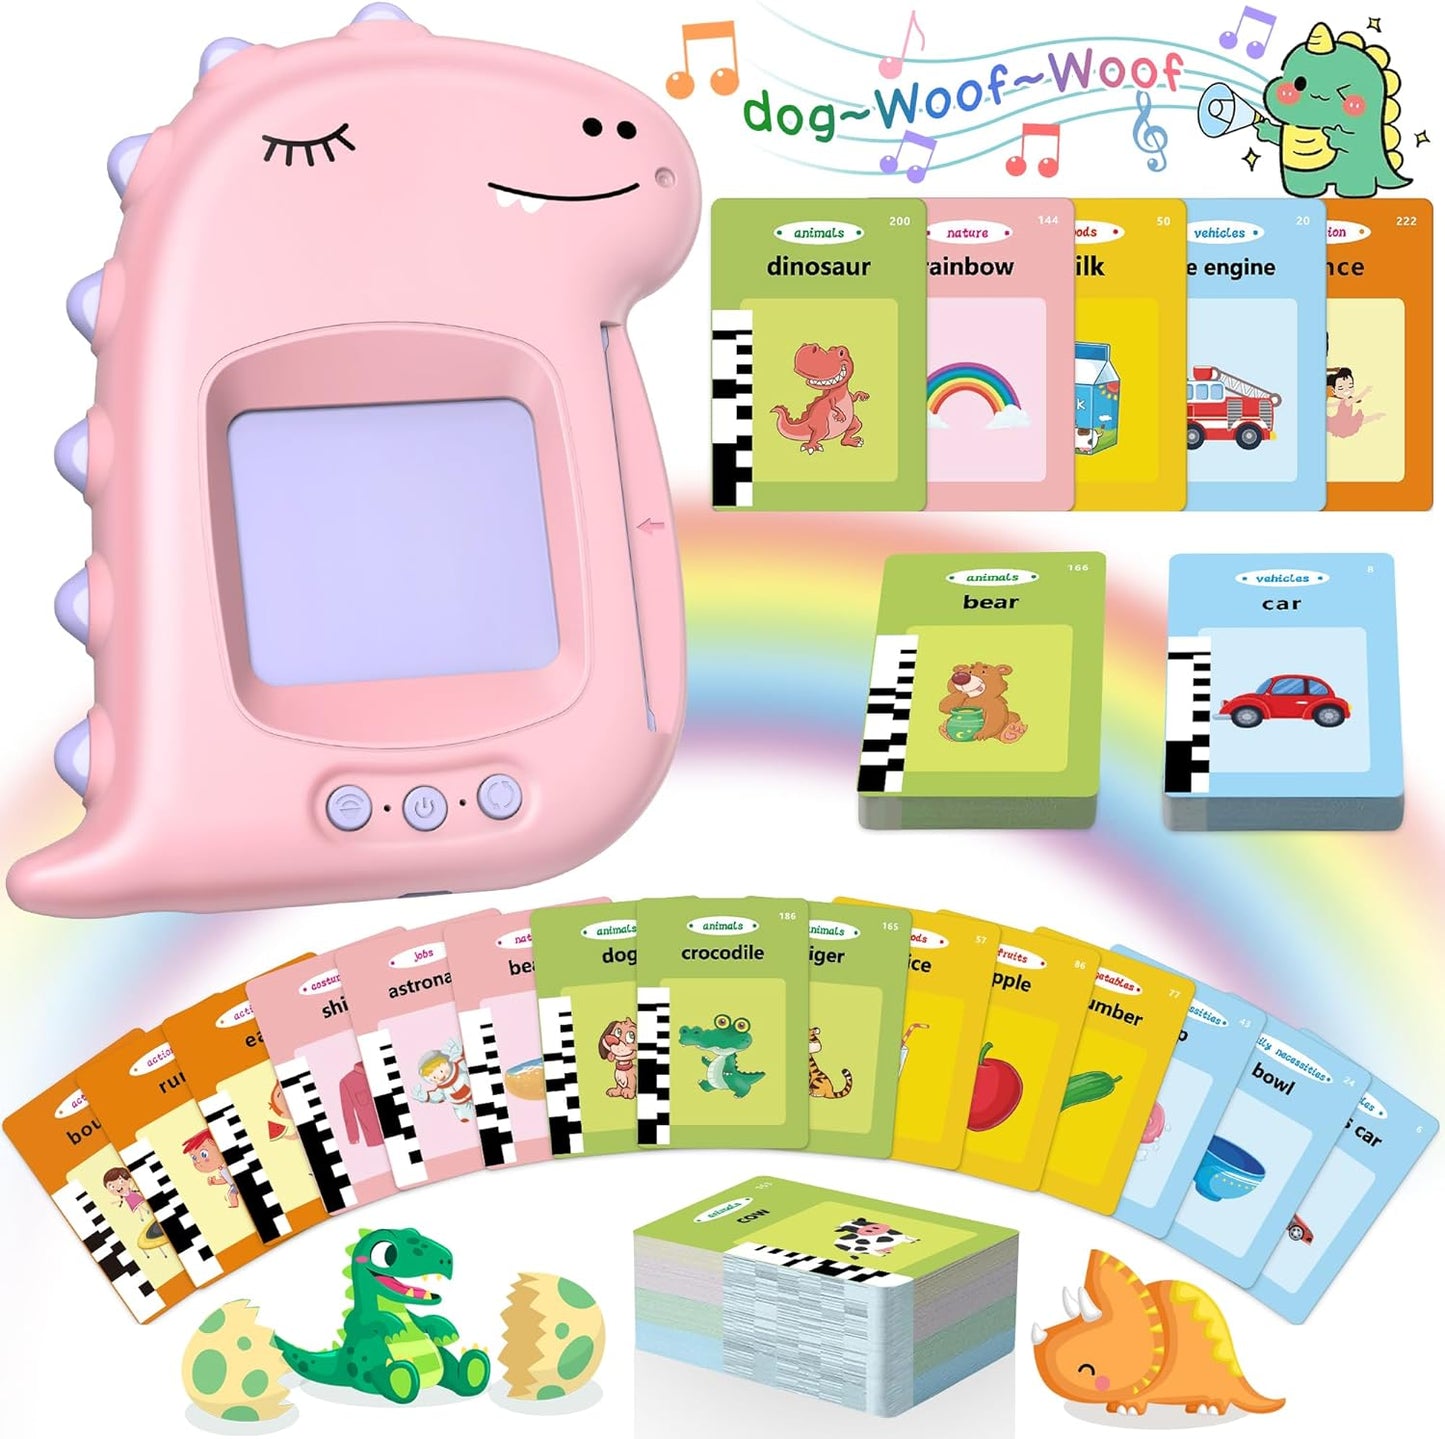 Toddler Toys Talking Flash Cards, Learning Toys for 1 2 3 4 5 Year Old Girls Boys, Kids Gifts Dinosaur Educational Montessori Pocket Speech Therapy 224 Sight Words Autism Sensory Toys